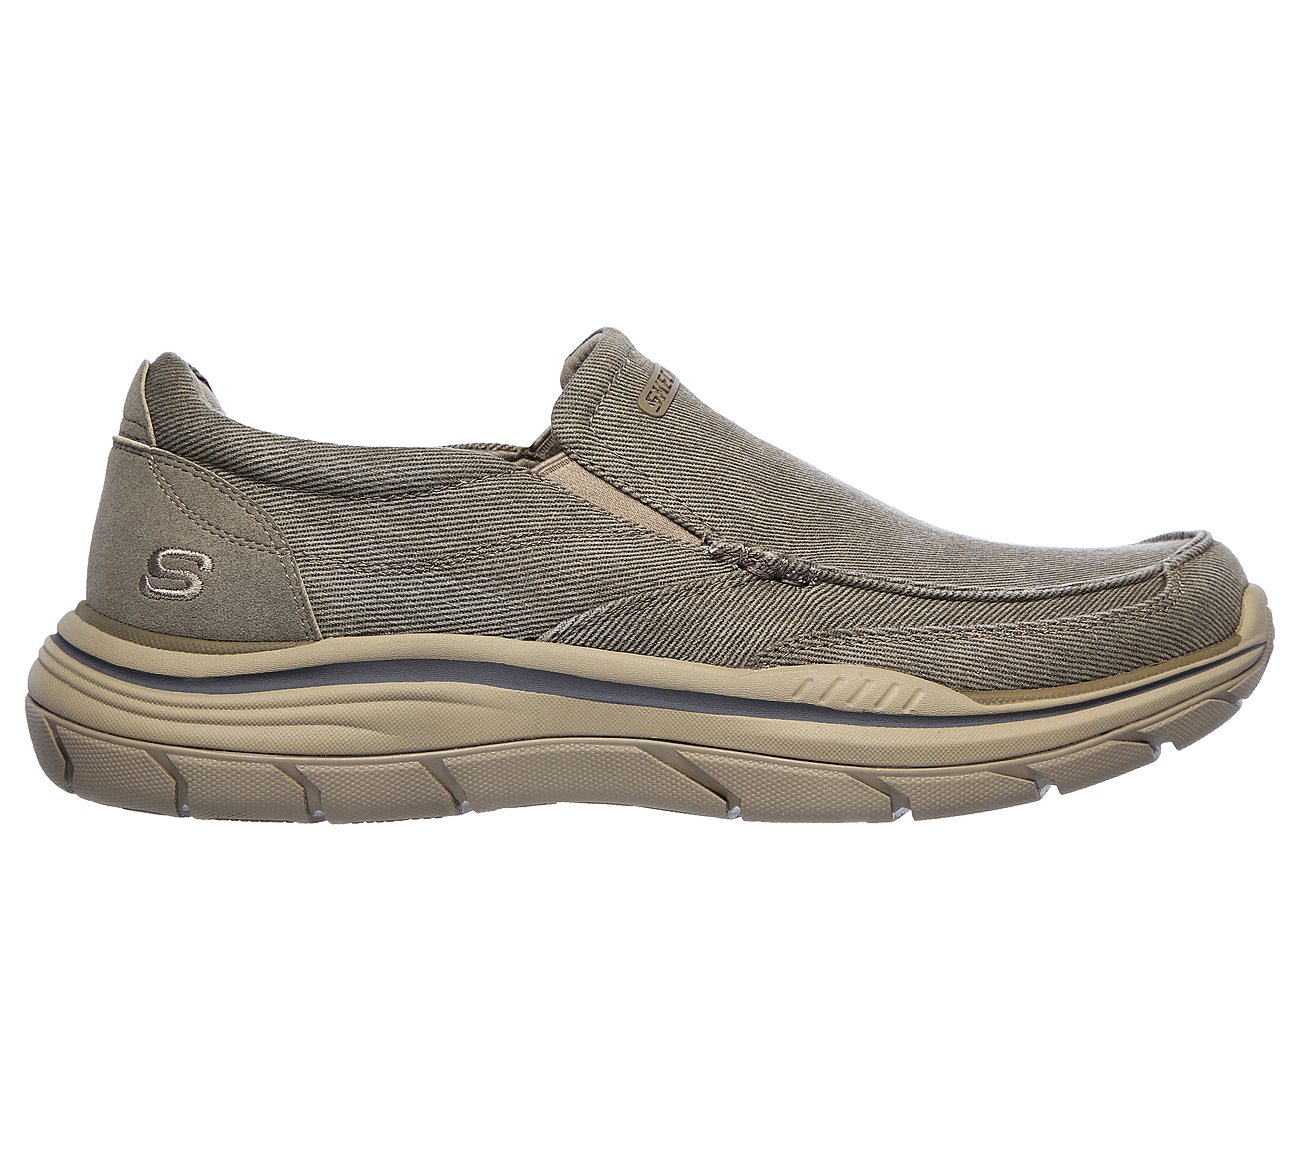 Buy SKECHERS Relaxed Fit: Expected 2.0 - Brako USA Casuals Shoes